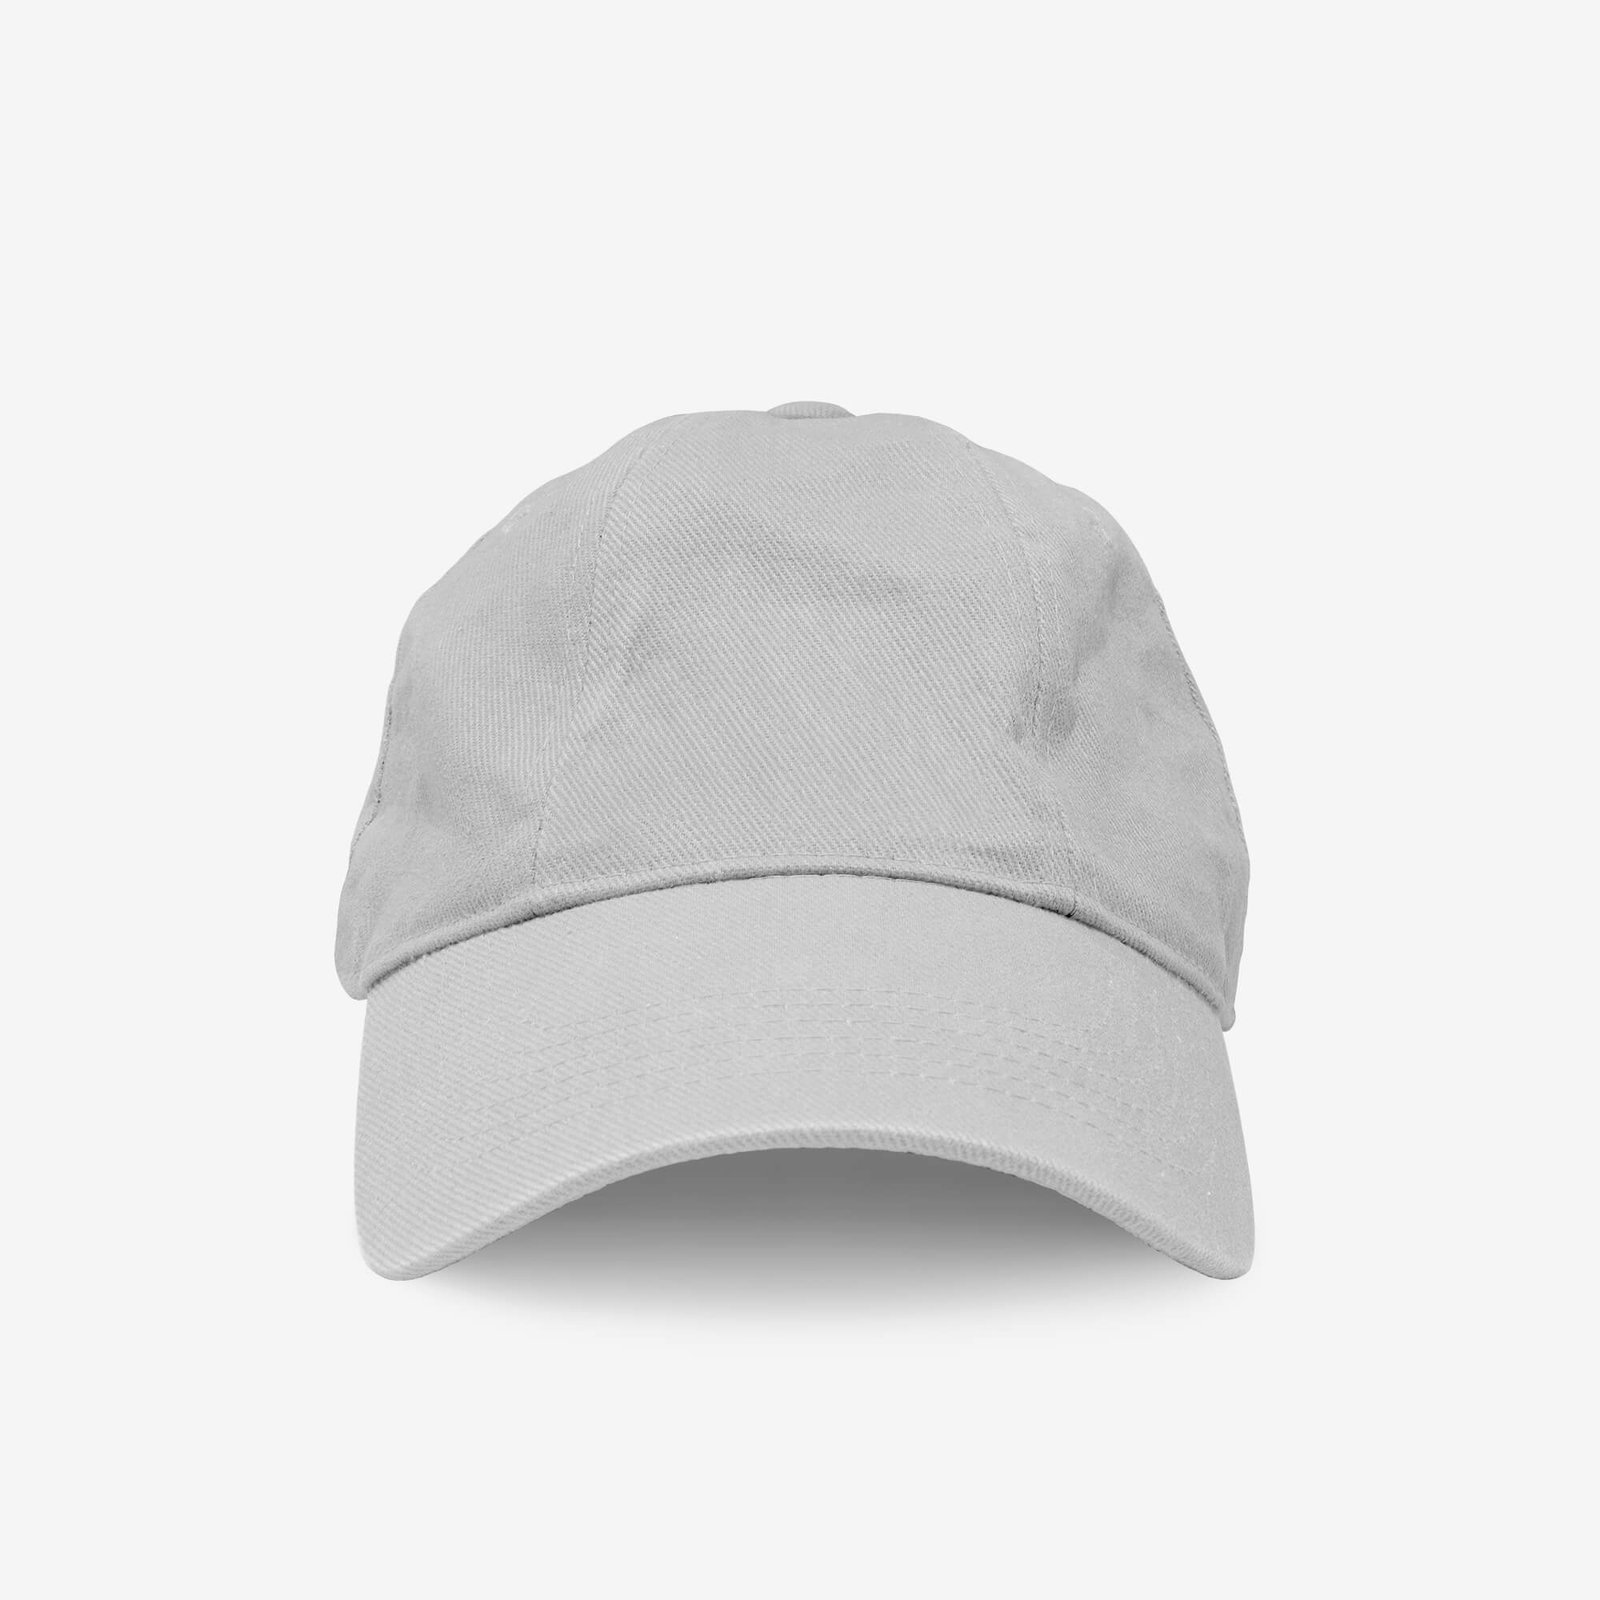 Blank Free Embroidered Hat Mockup PSD Template